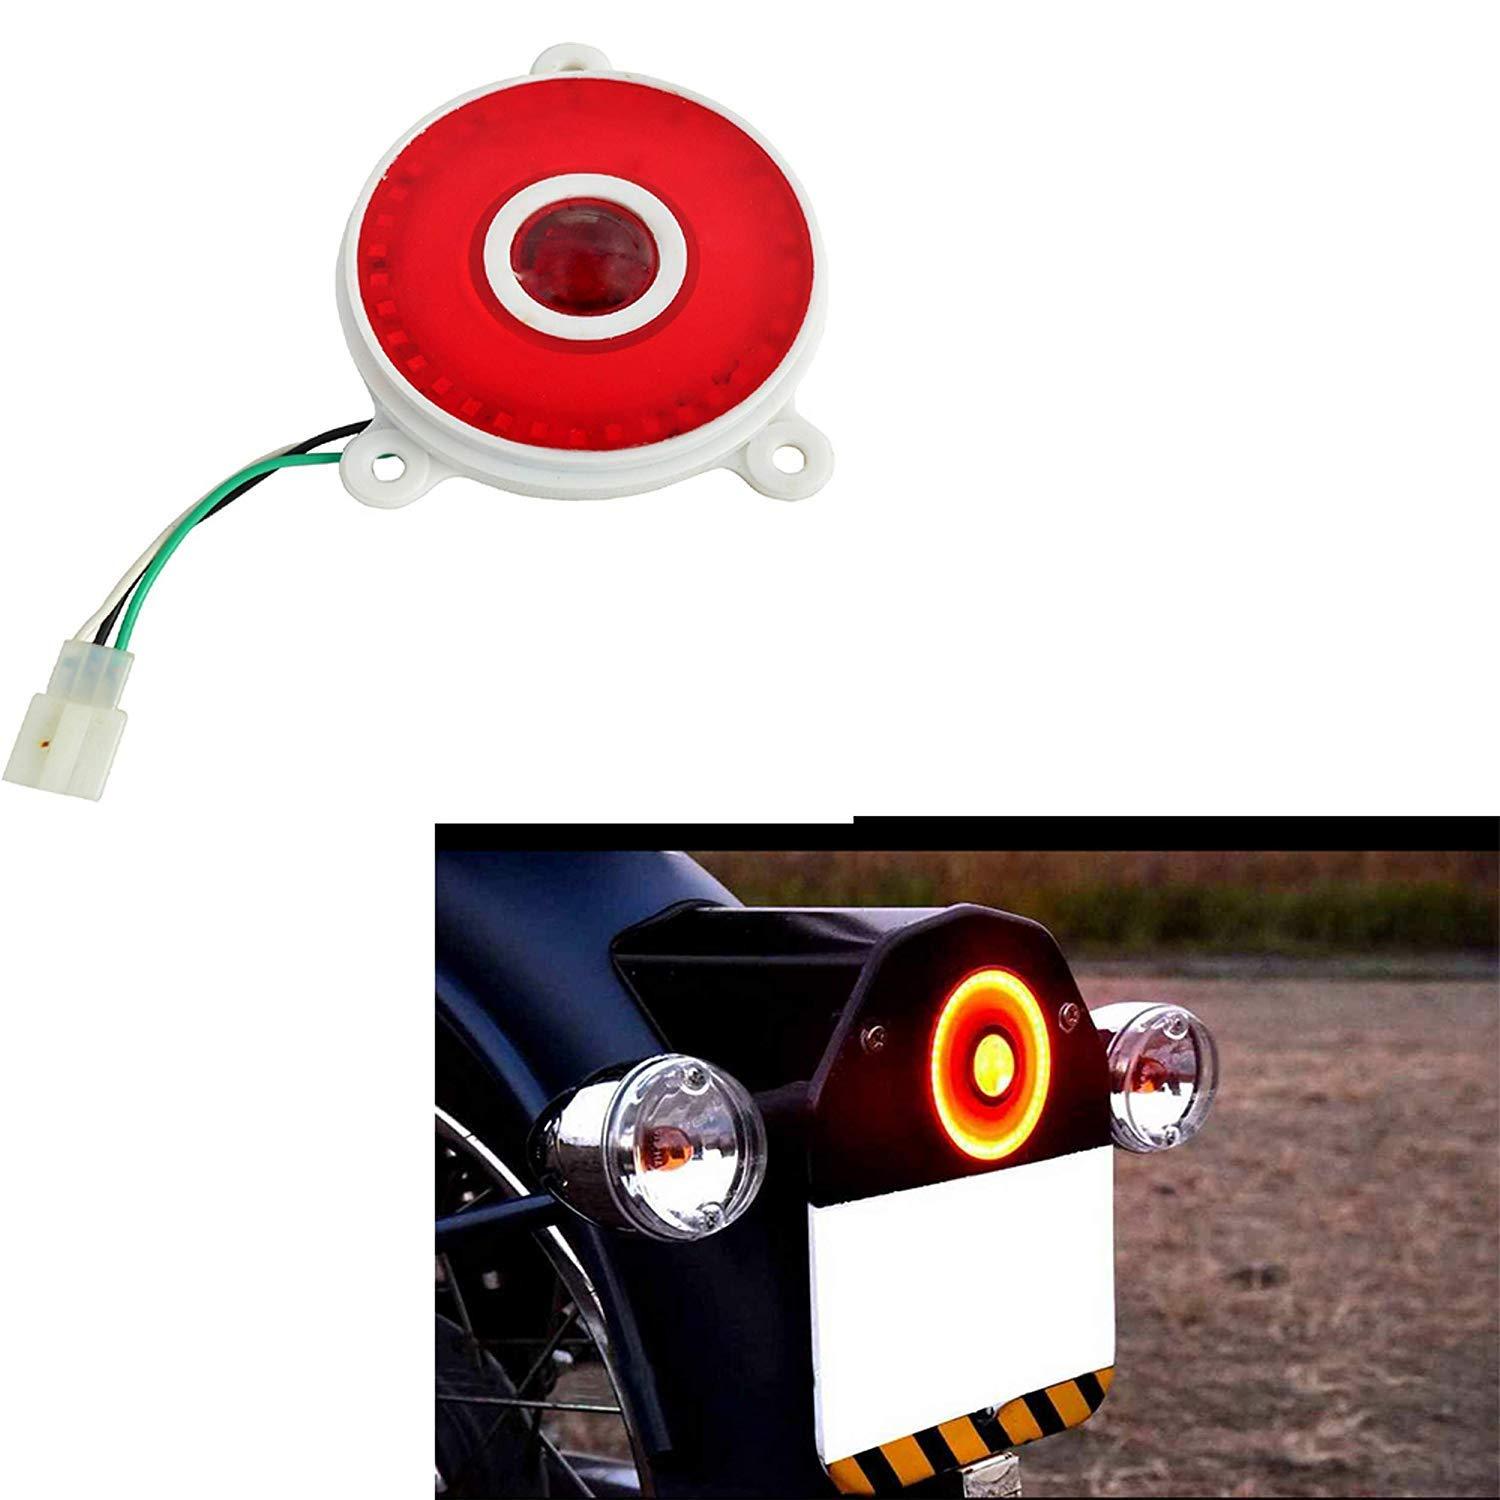 Slim Tail Light - Premium Accessories from Sparewick - Just Rs. 750! Shop now at Sparewick